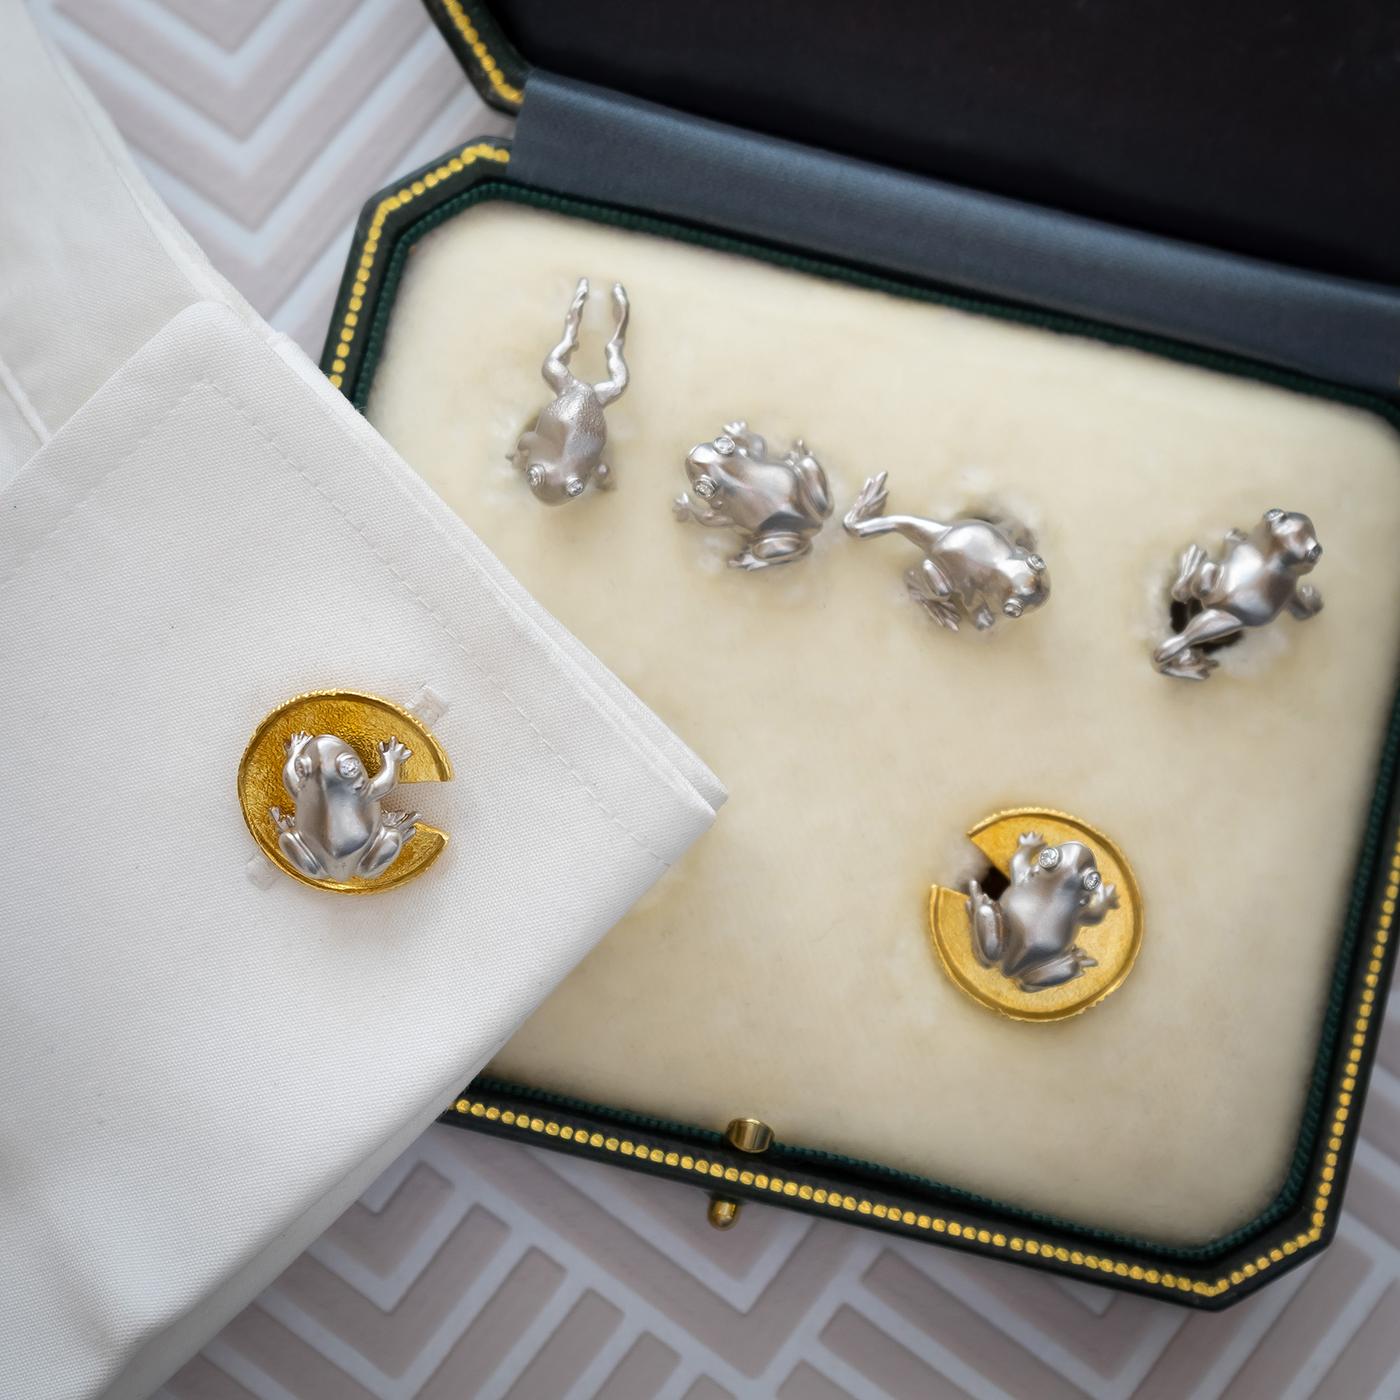 A frog dress-set, with four platinum studs, representing frogs in different positions, with diamond eyes, in rub-over settings and frog on yellow gold lily pad cufflinks, signed JB. Cufflinks measure approximately 19.6 x 19.2mm. Circa 1995.